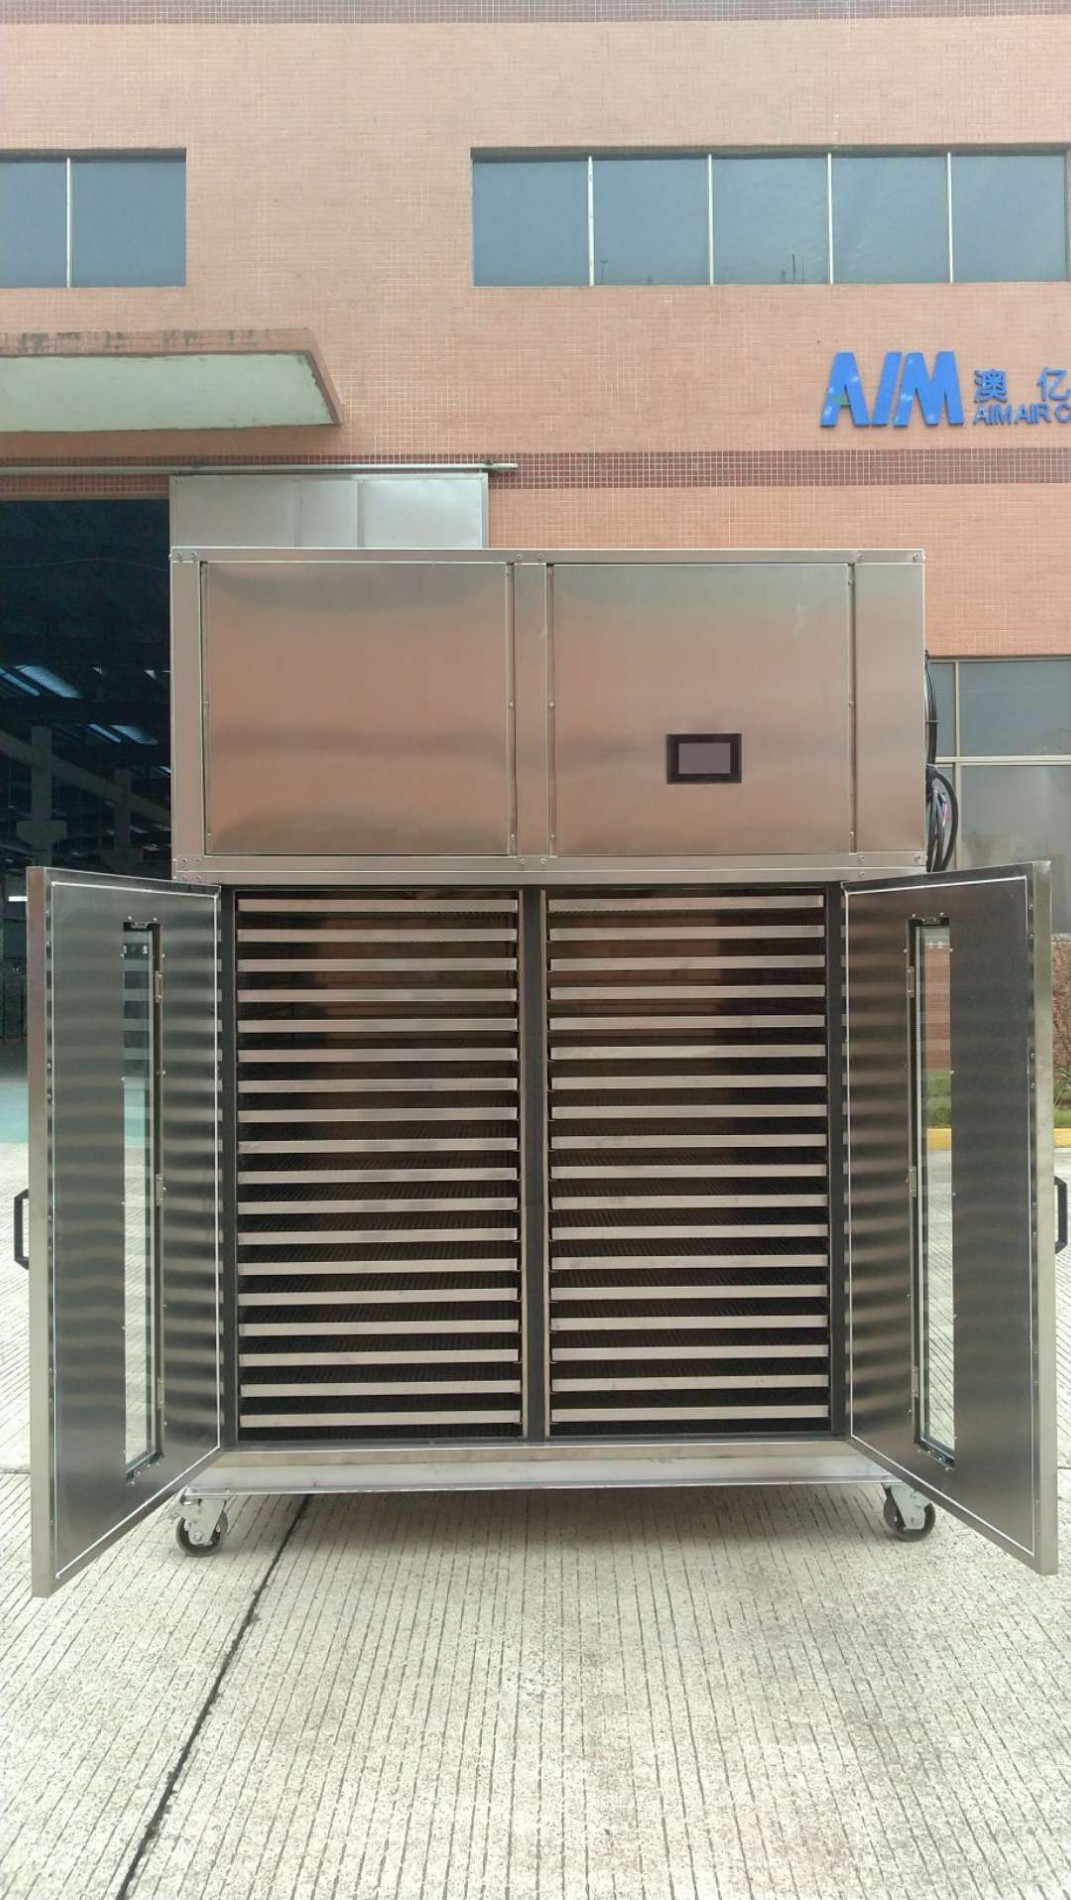 High quality energy saving techology  Air Source Dryer Quotes,China heat pump equipment Air Source Dryer Factory, pump equipmentAir Source Dryer Purchasing